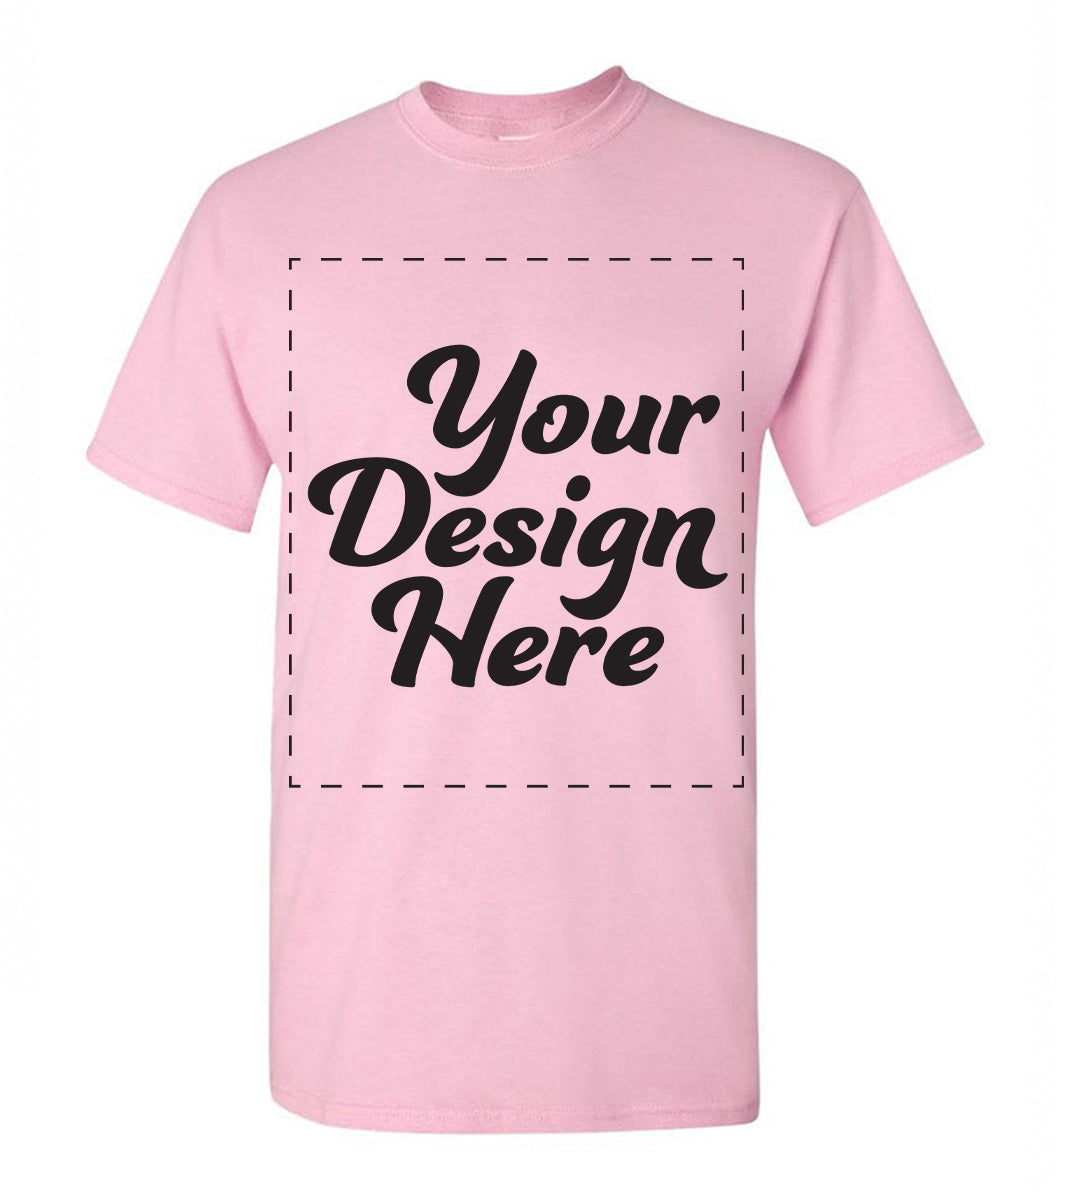 Buy Online Custom T-Shirt Design Your Own Print Text or Image